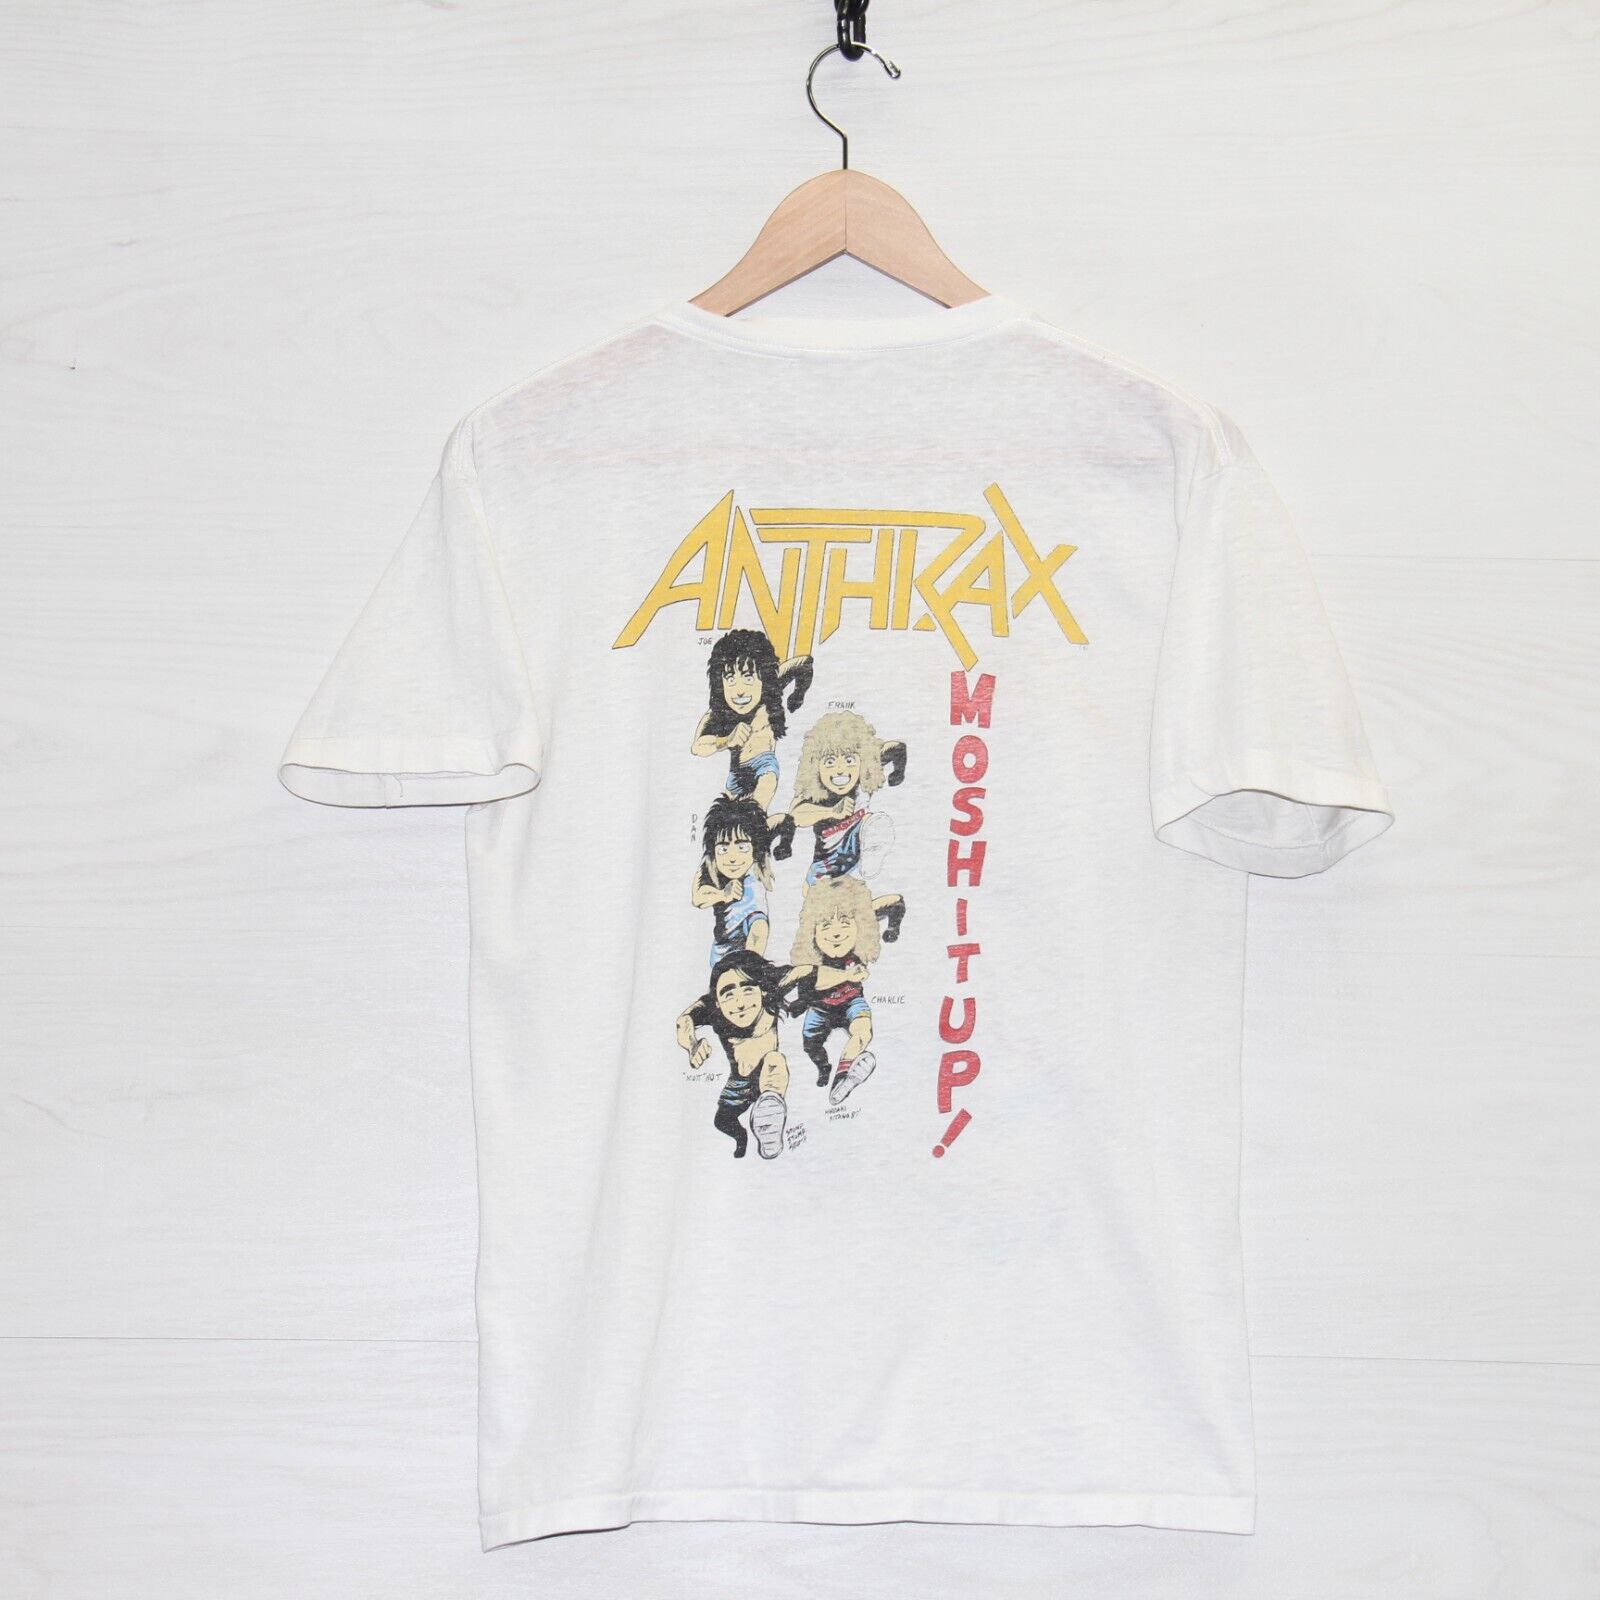 Vintage Anthrax Mosh It Up T-Shirt Size Small 1987 80s Heavy Metal